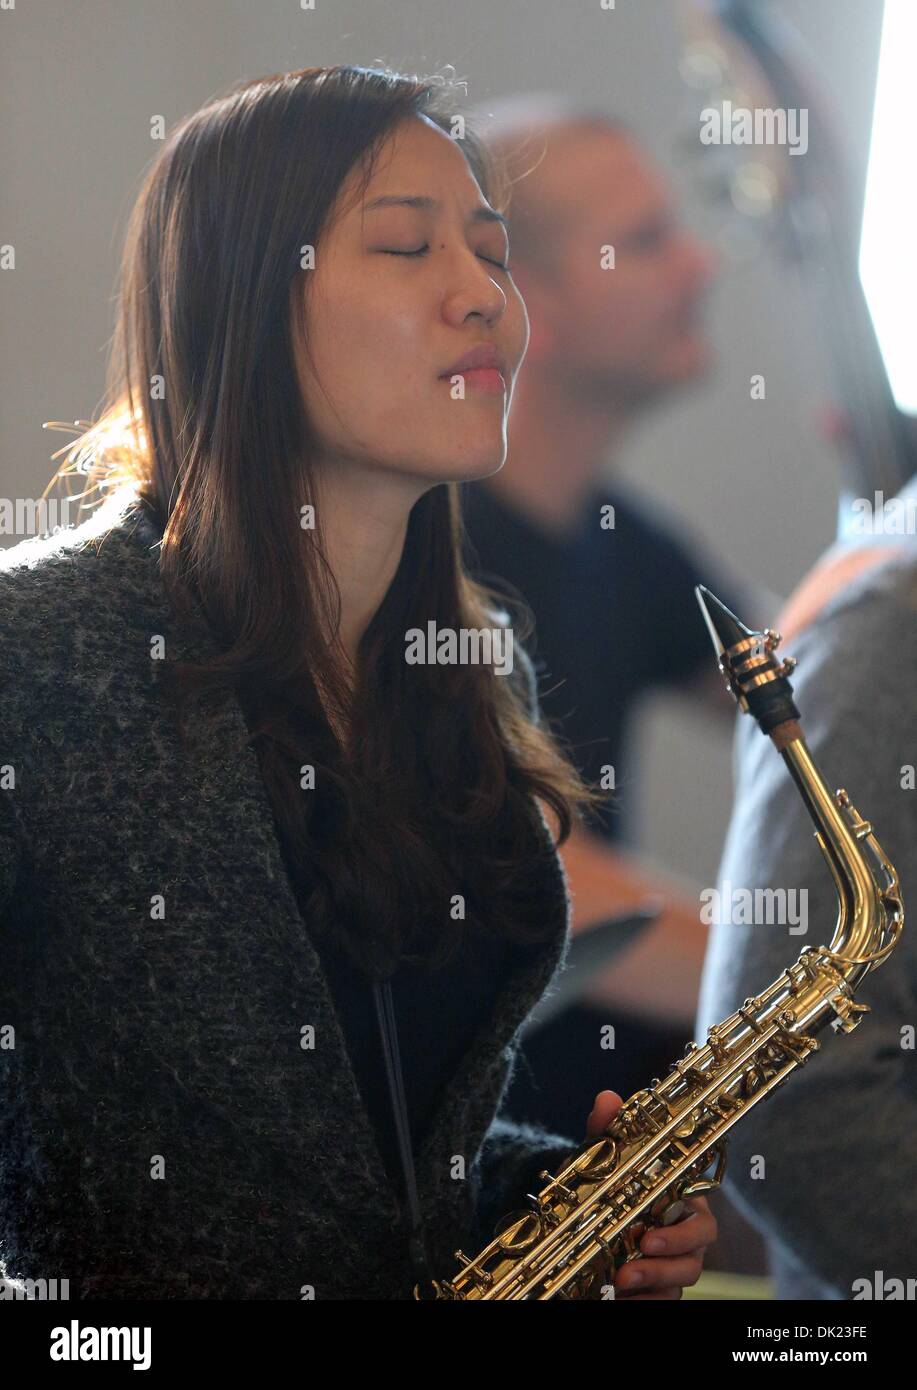 (131202) -- FRANKFURT, Dec. 2, 2013 (Xinhua) -- South Korean  Musician Jin Pureum performs Saxphone at Juedisches Museum in Frankfurt, Germany on Dec. 1, 2013. Seven South Korean jazz musicians including Jin Pureum are on their schedule to stage 30 performance in 9 German cities from Nov. 28 to Dec. 8, commorating the 130th anniversary of the founding of diplomatic relation between South Korea and Germany. (Xinhua/Luo Huanhuan) (srb) Stock Photo